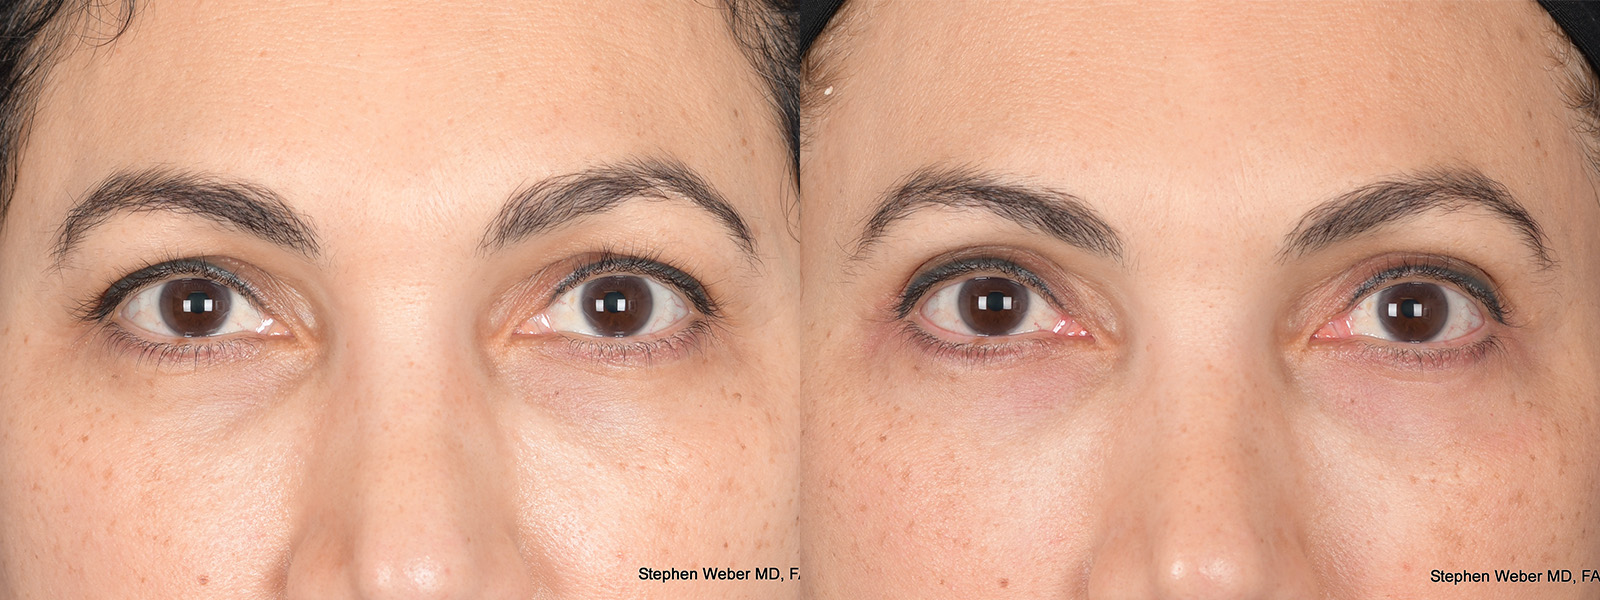 Before and After Eyelid Surgery in Denver 4